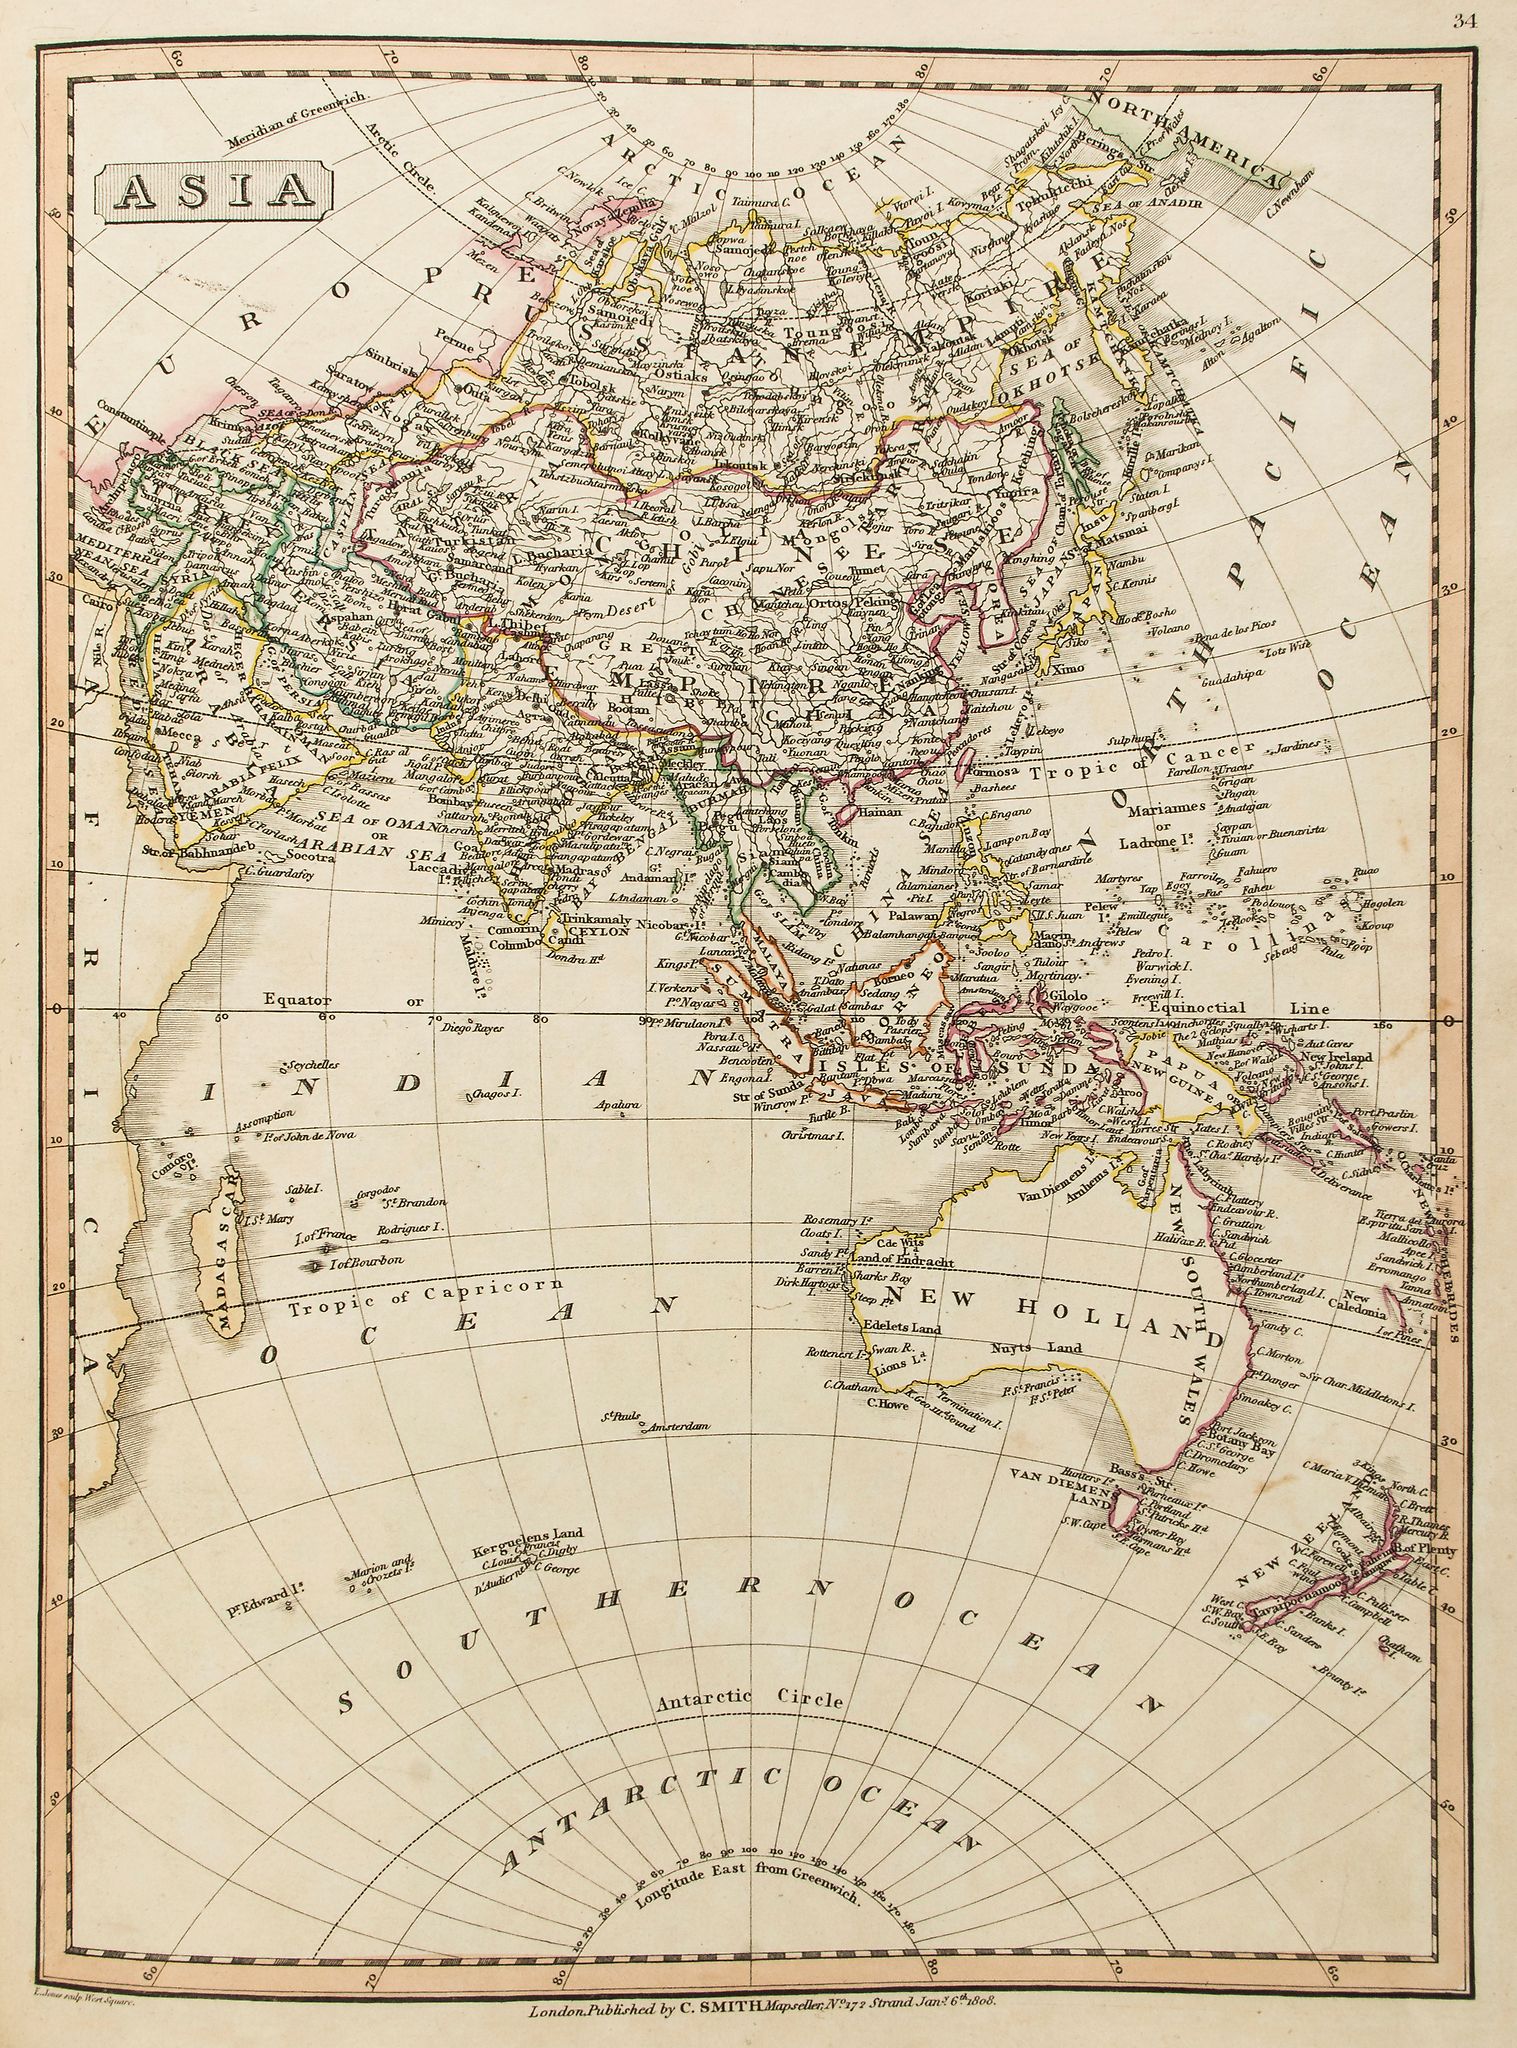 Atlases.- Smith (Charles) - Smith's New General Atlas, title and 46 maps, including 2 double-page